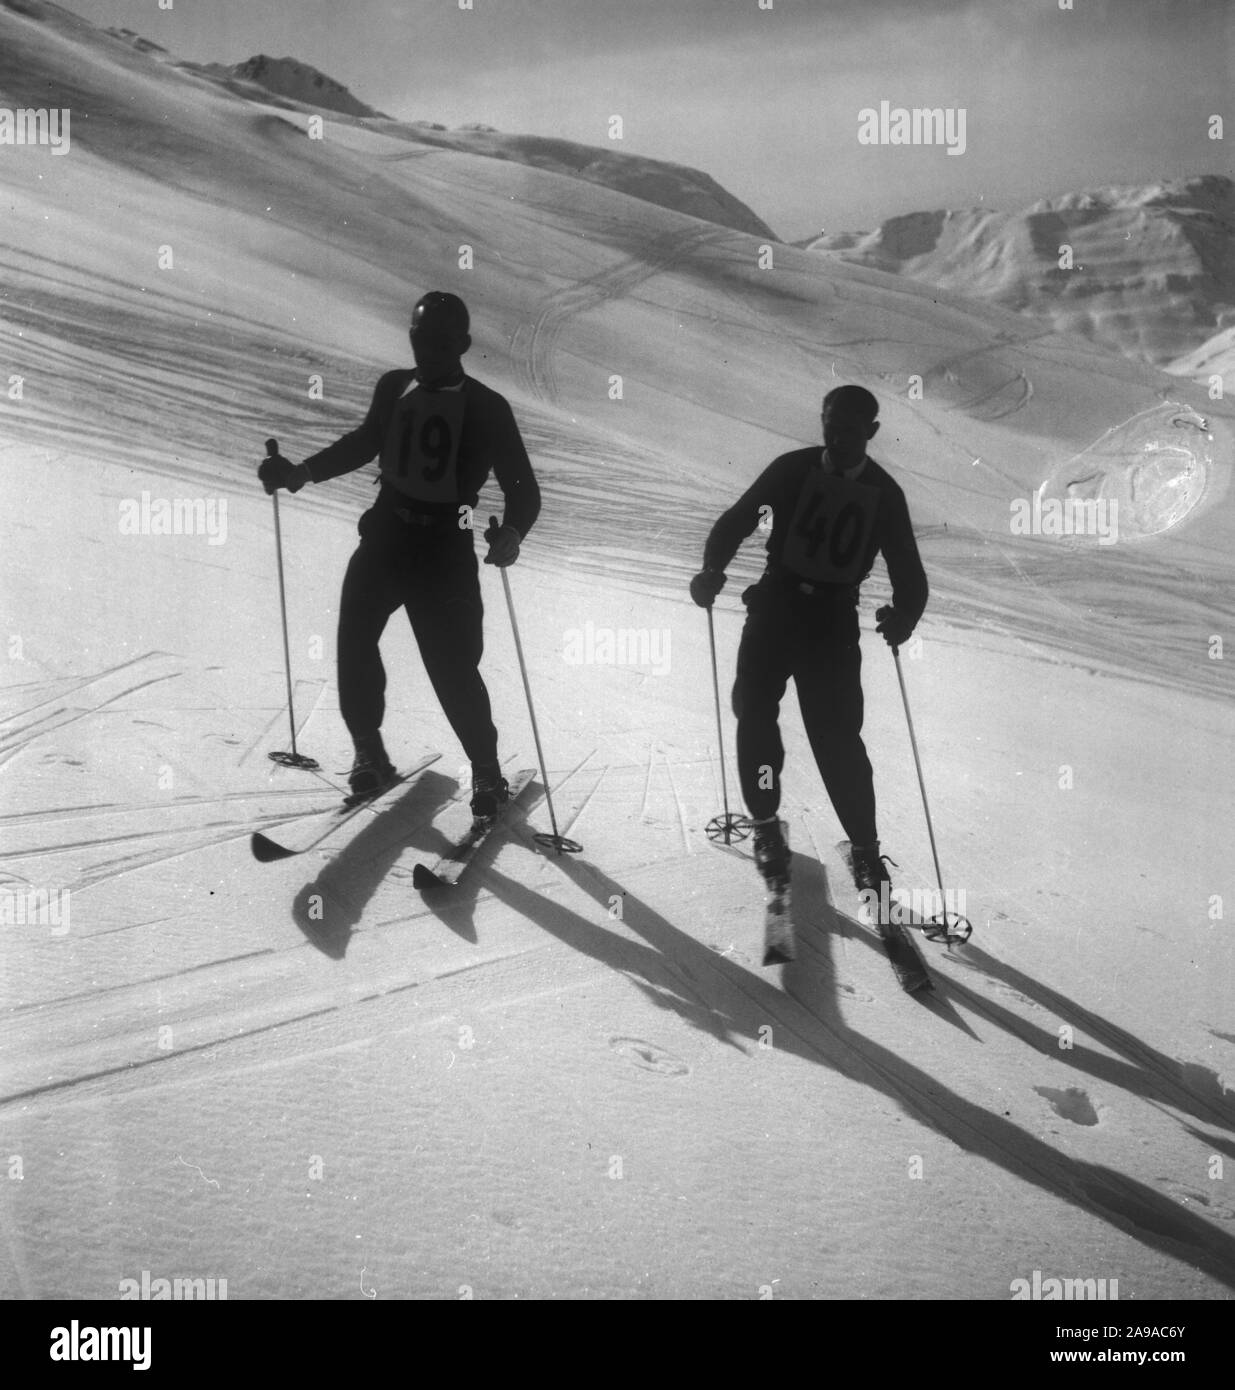 Departure ski Black and White Stock Photos & Images - Page 3 - Alamy